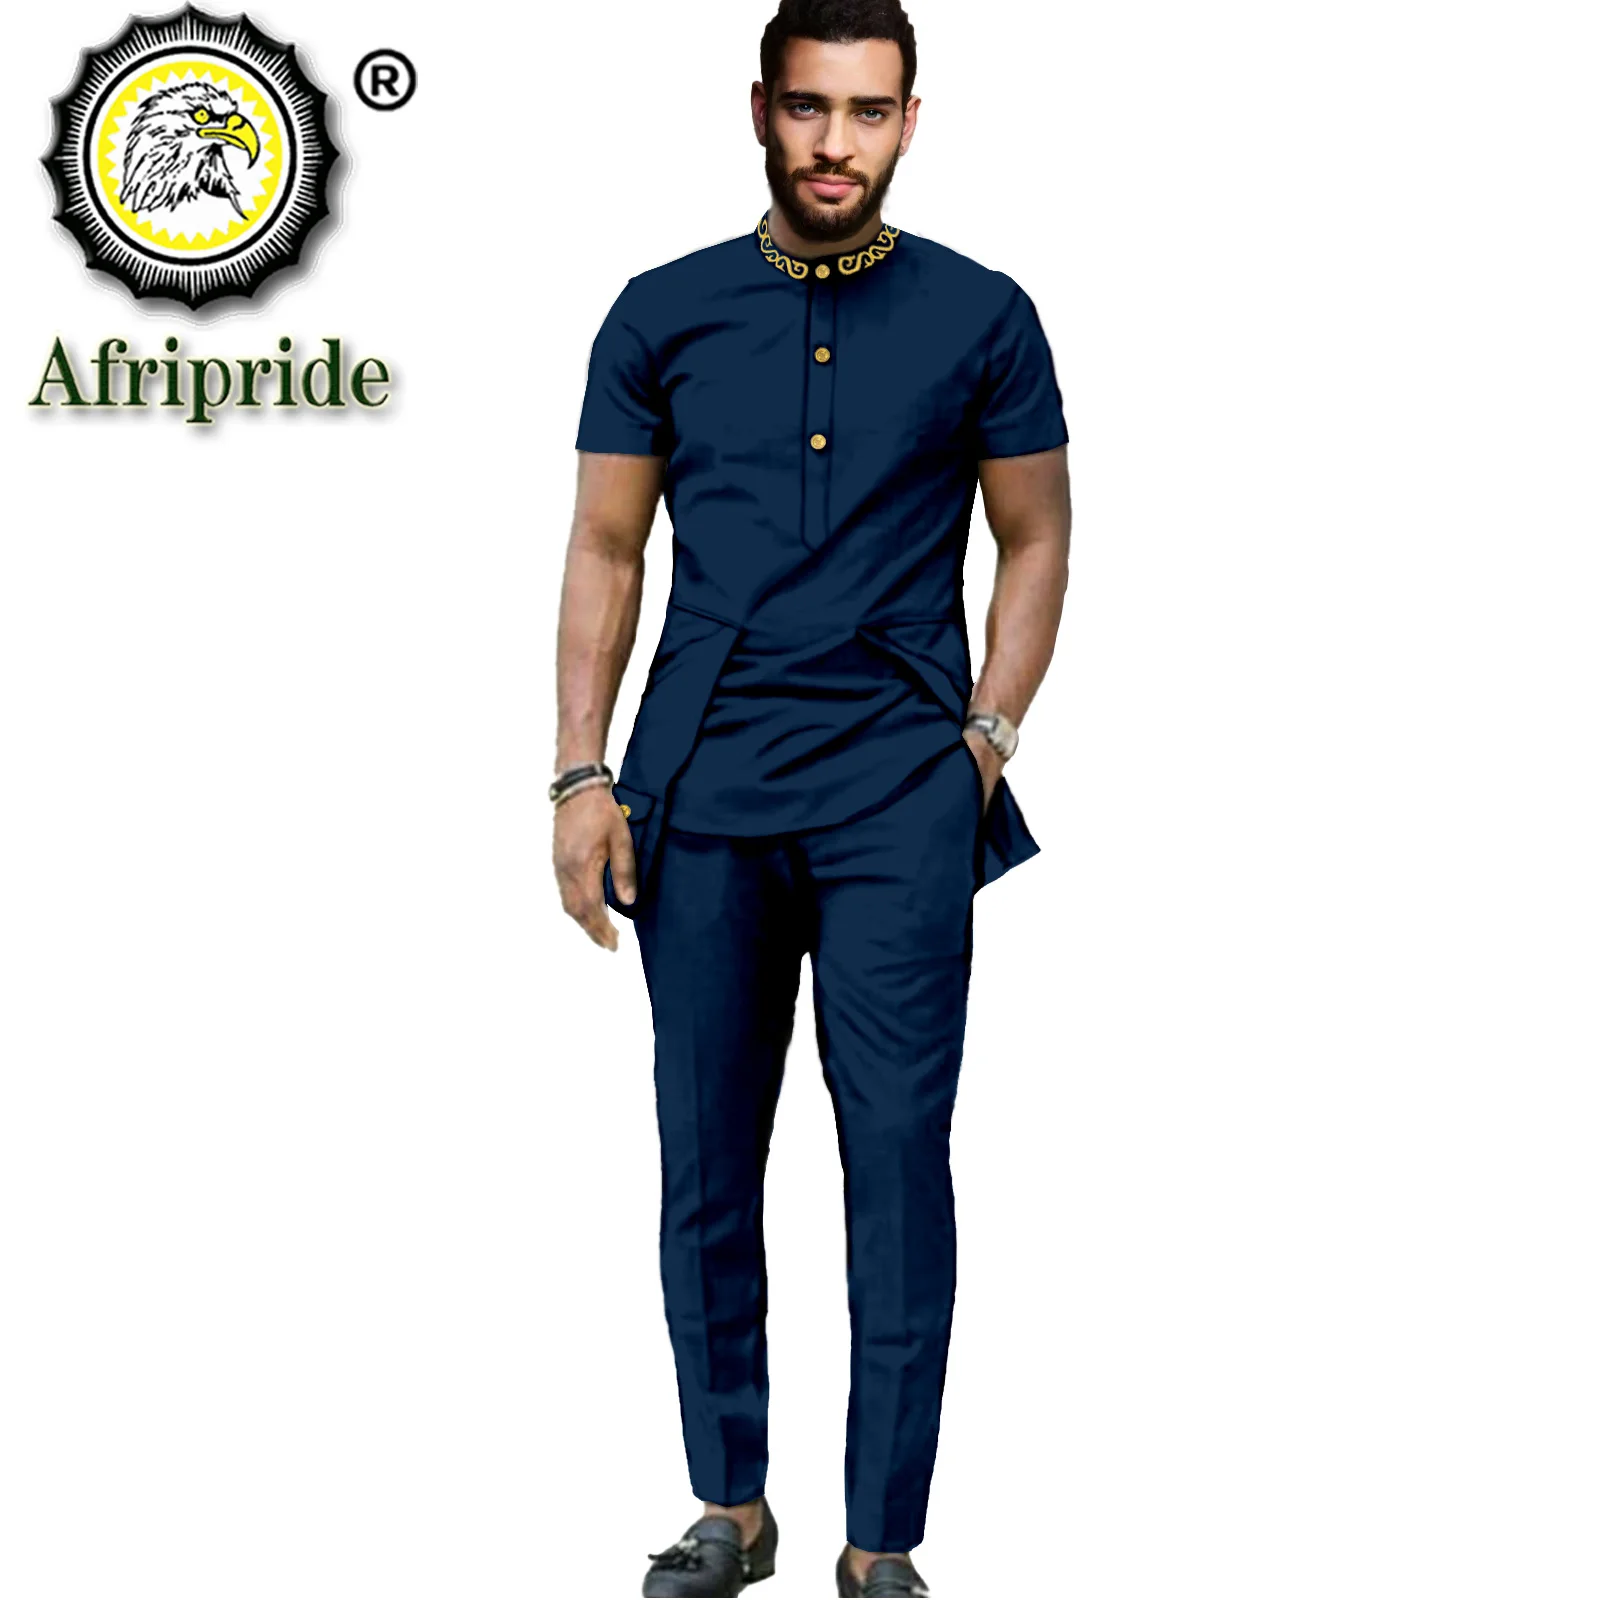 African Clothes for Men Embroidery Short Sleeve Shirt and Pant 2 Piece Set Dashiki Outfit Plus Size Tracksuit Blouse S2116011 african men s tracksuit dashiki printed blouse and pants set ankara clothing short sleeve shirts suit afripride a1916045